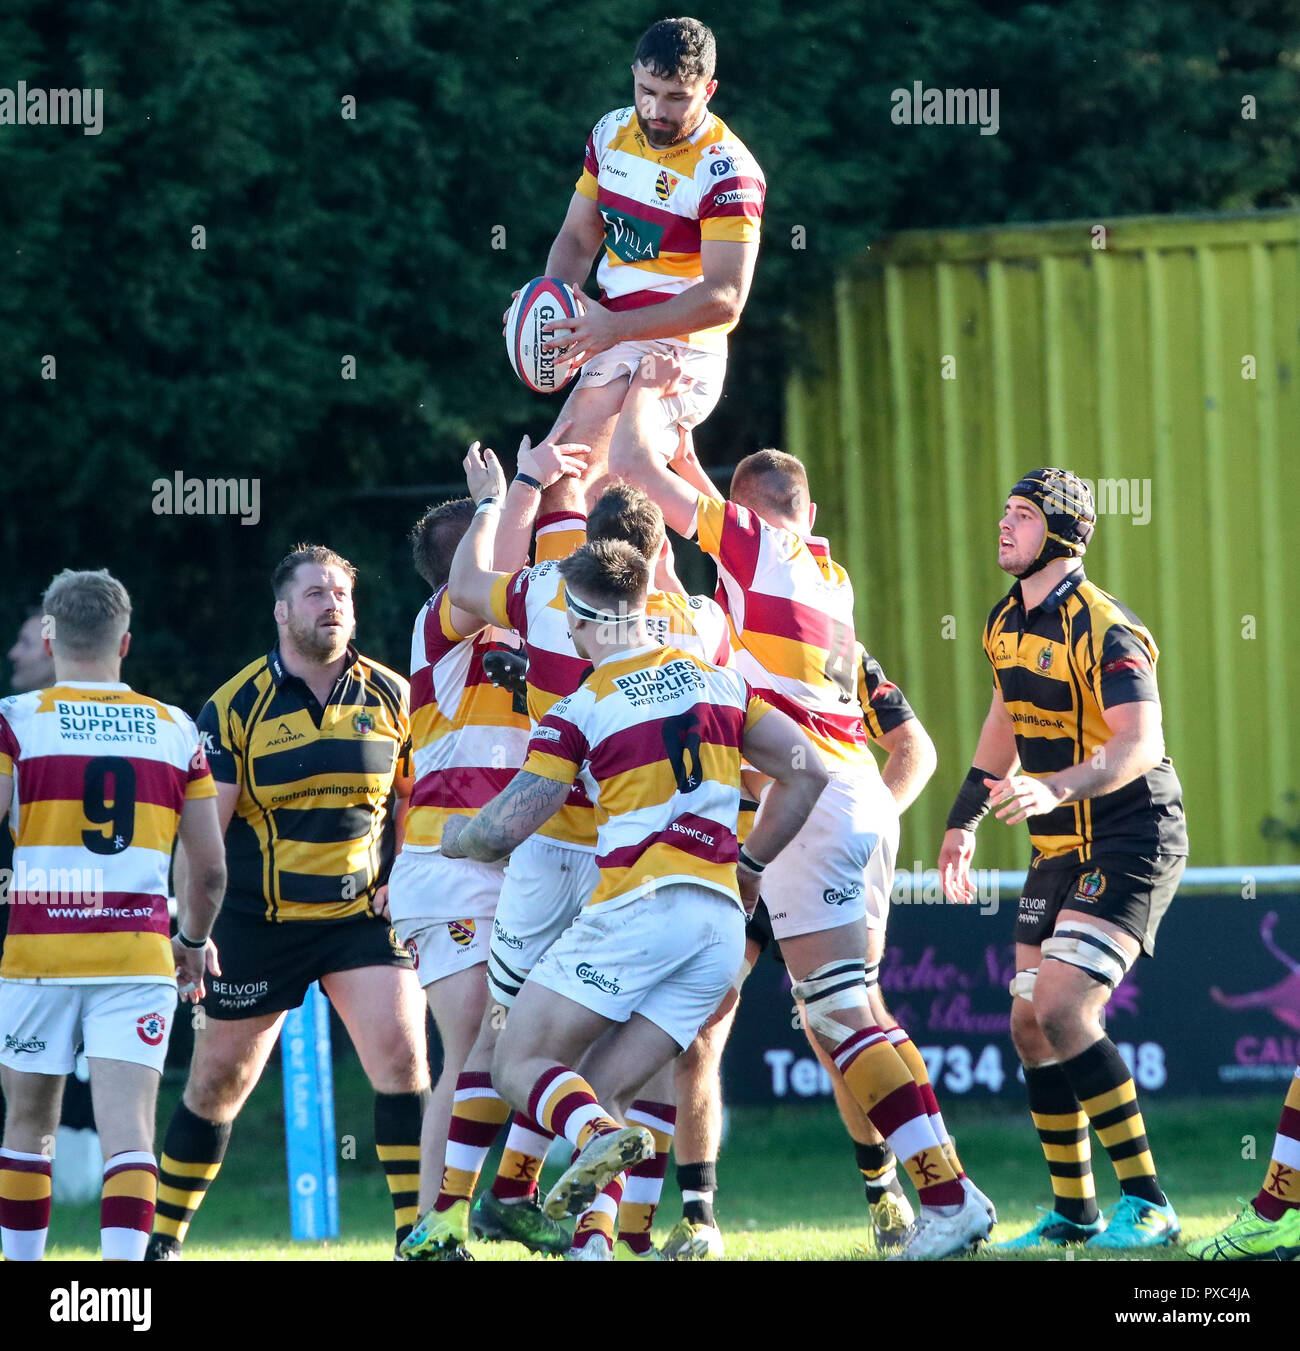 20.10.2018 Hinckley, Leicester, England. Rugby Union, Hinckley rfc v Fylde rfc.  Flanker Ben OÕRyan takes the lineout ball during the RFU National League 2 North (NL2N) game played at the Leicester  Road Stadium.    © Phil Hutchinson / Alamy Live News Stock Photo